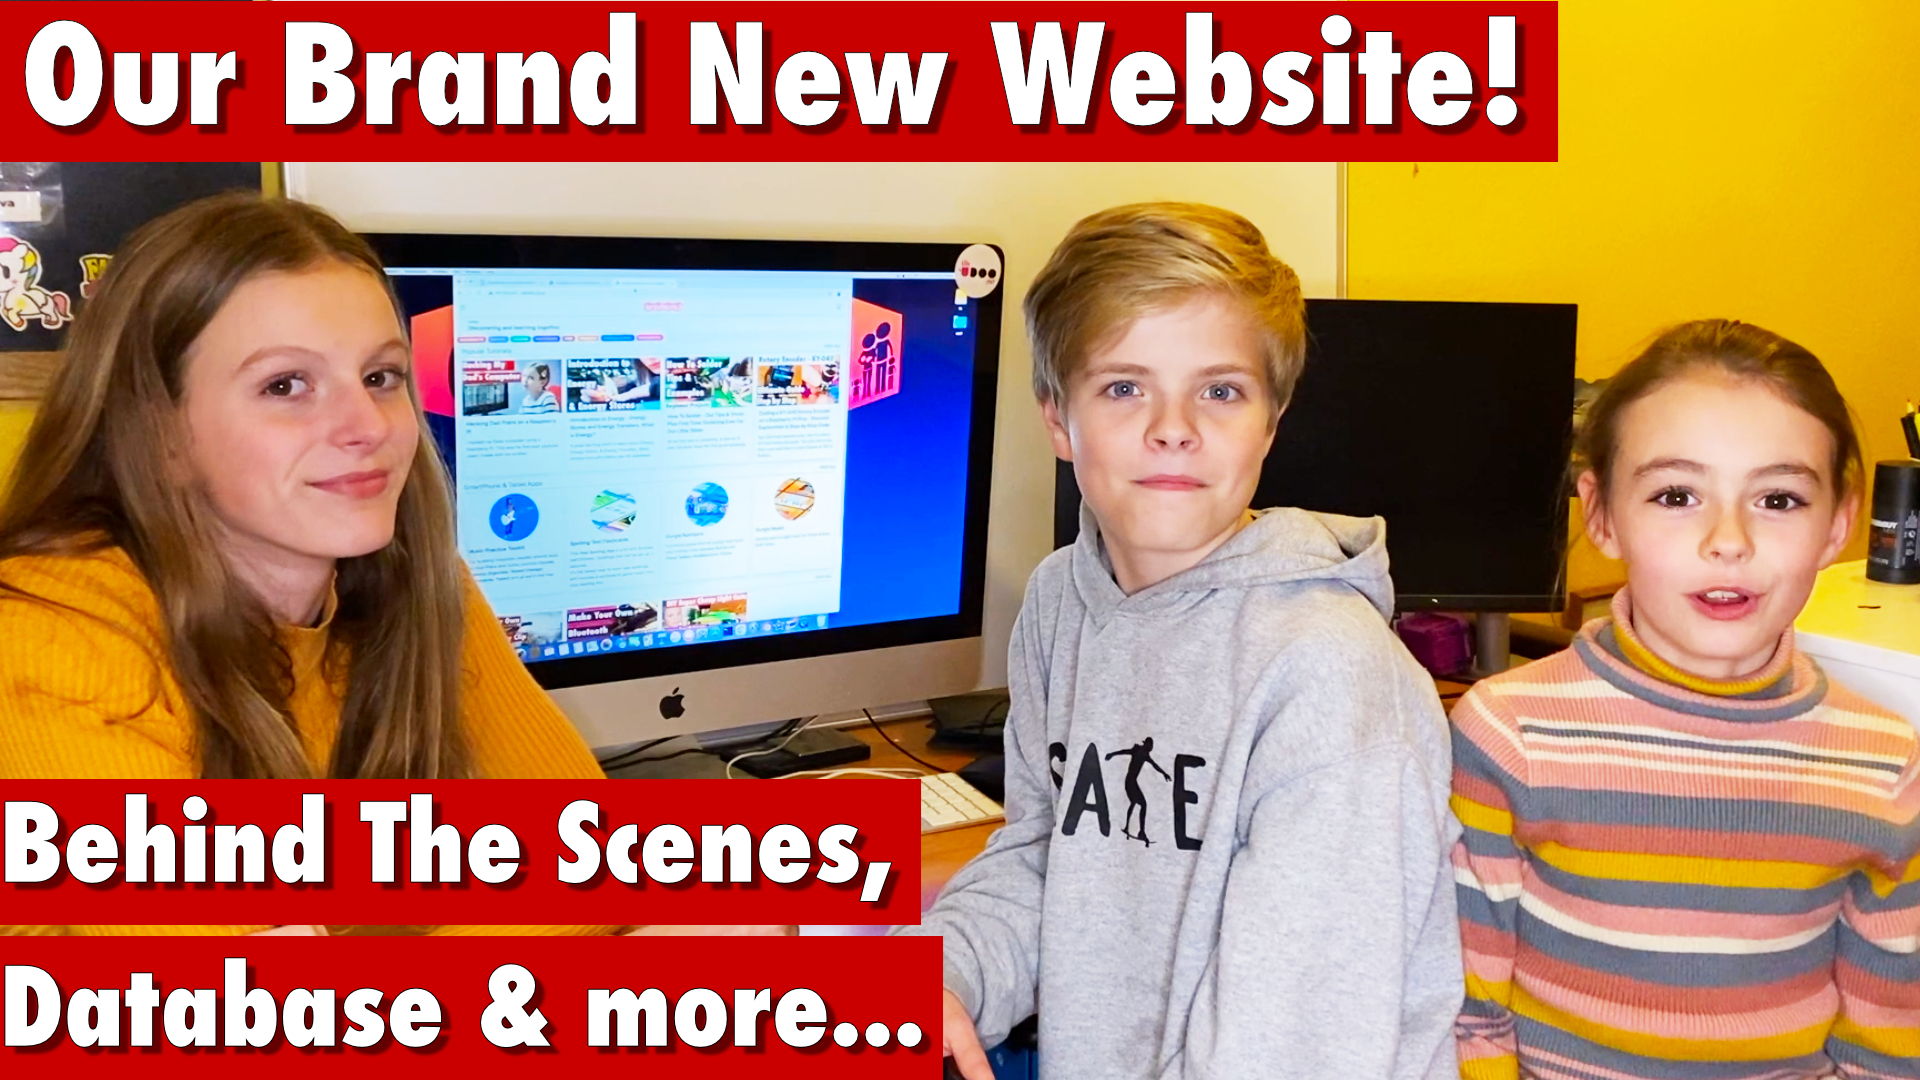 3 kids in front of a monitor showing gurgleapps.com website